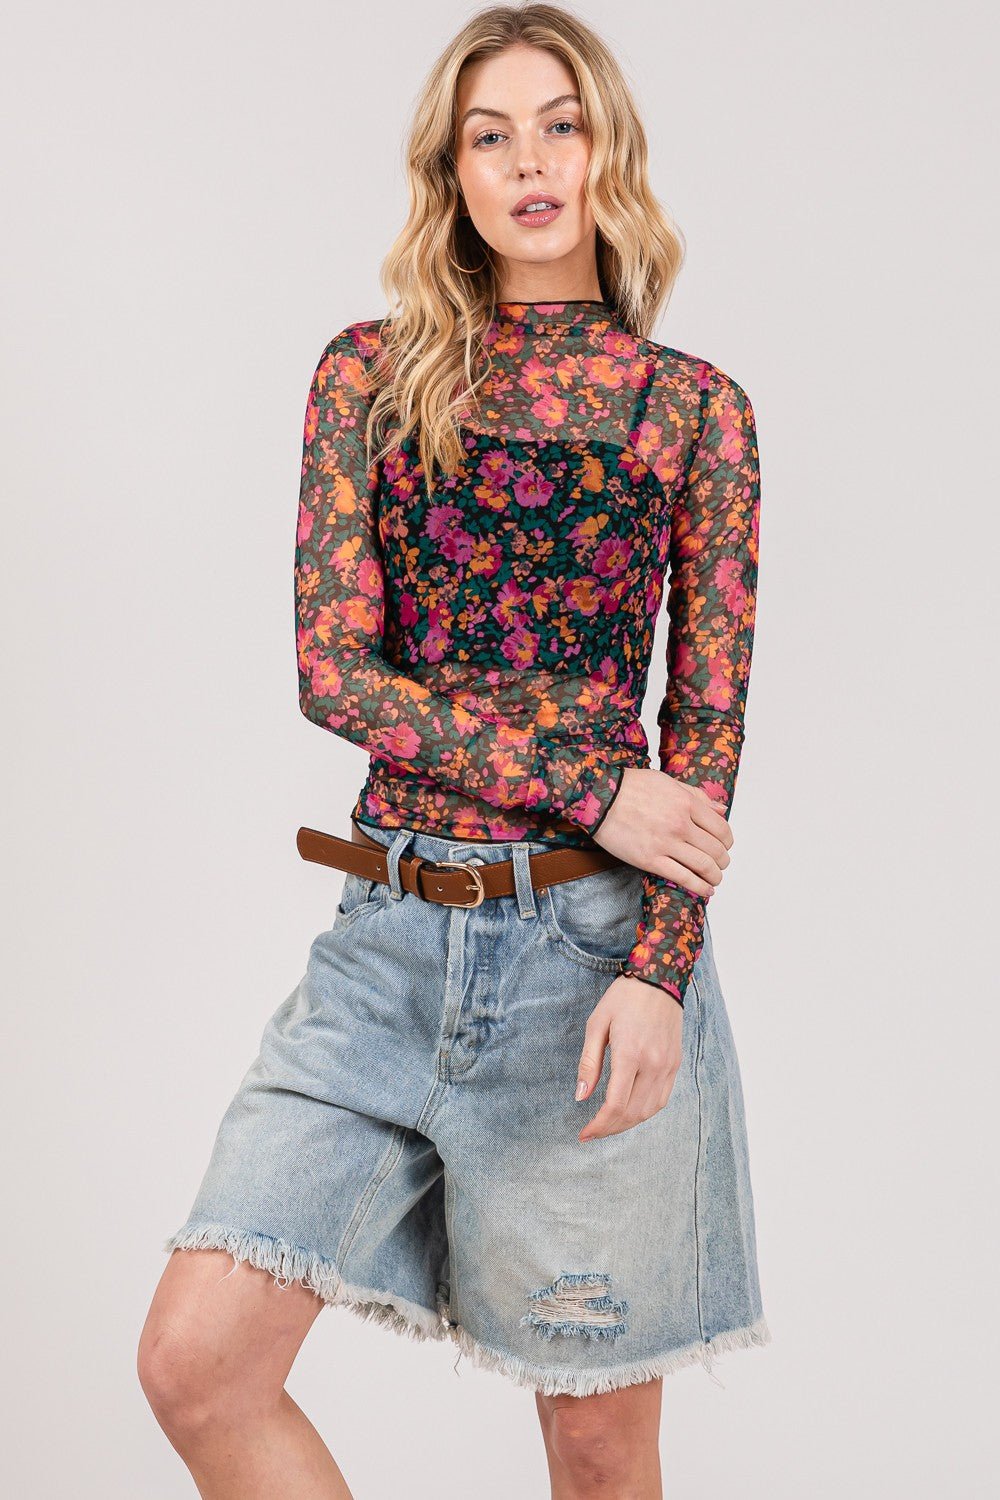 SAGE + FIG Floral Mesh Long Sleeve Top - Happily Ever Atchison Shop Co.